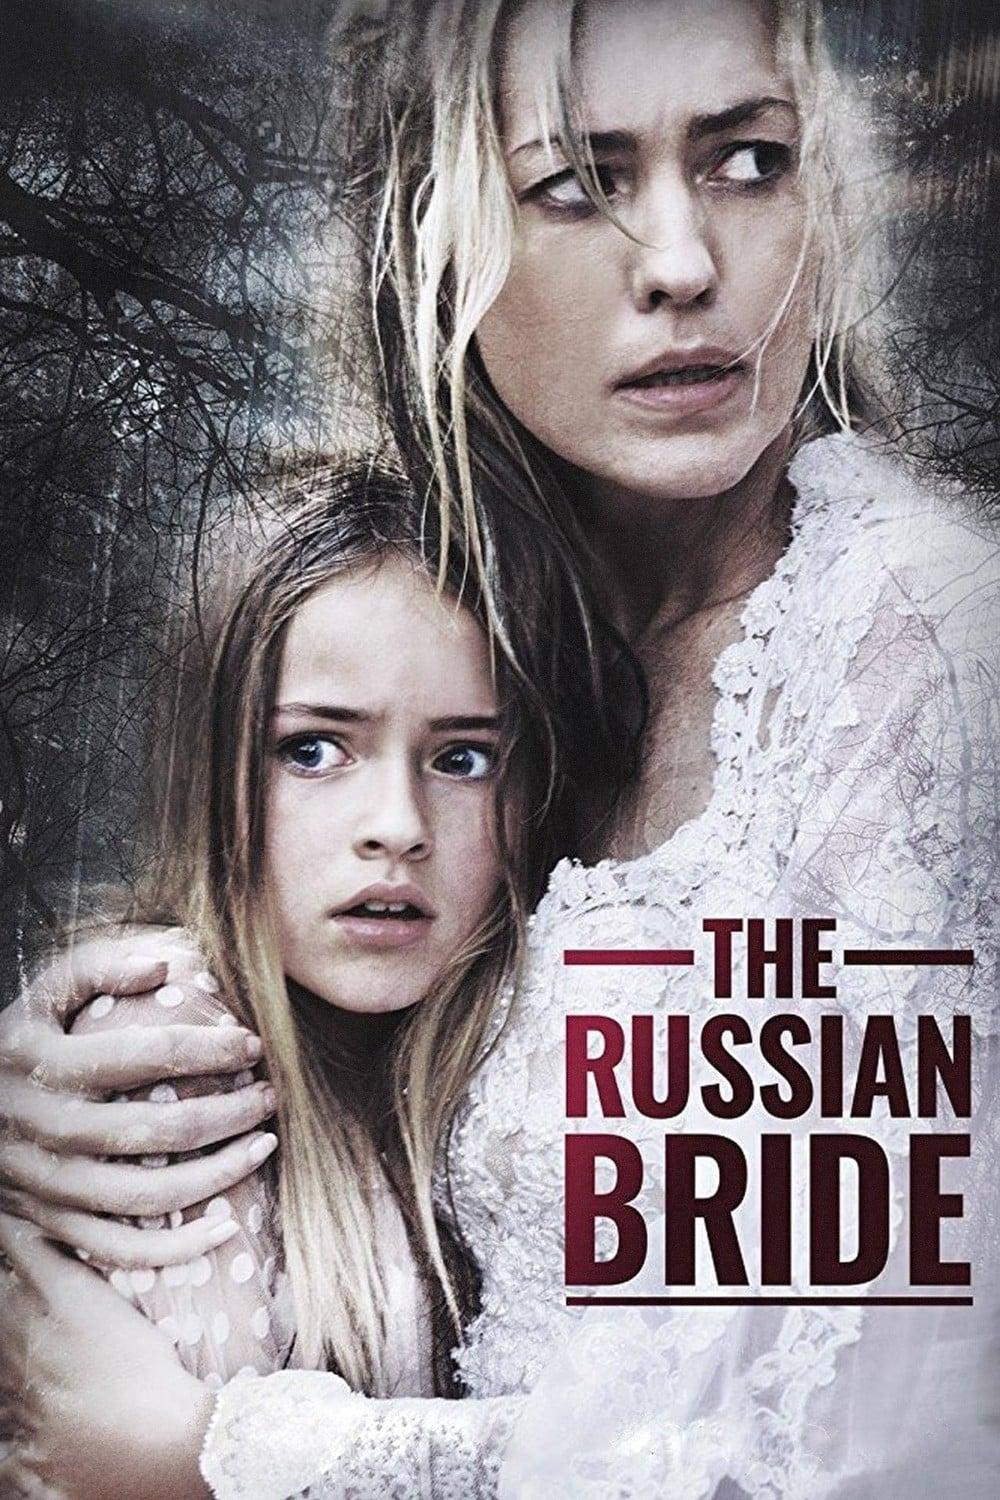 The Russian Bride poster